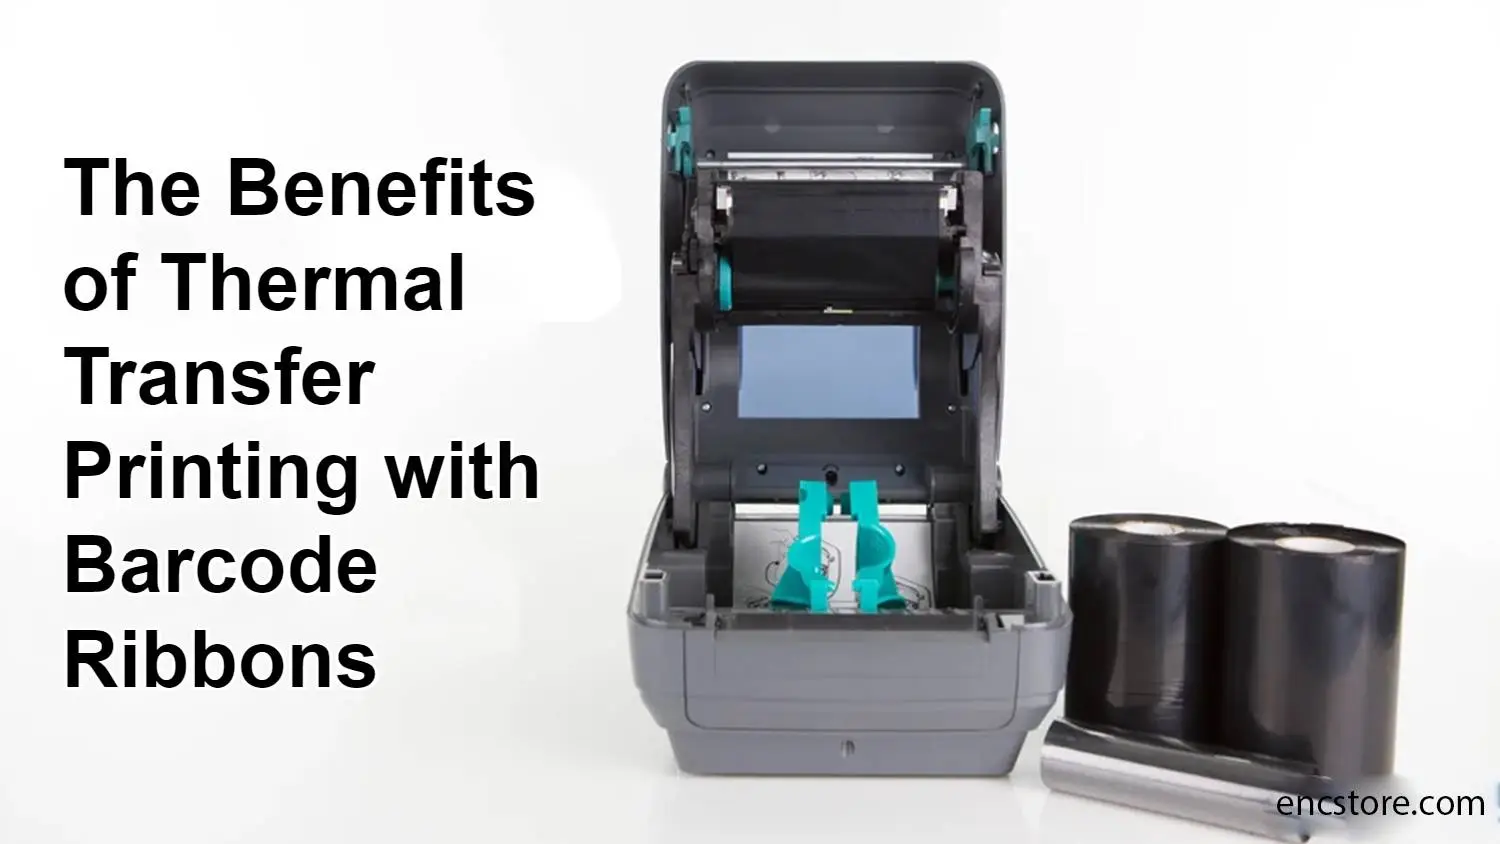 The Benefits of Thermal Transfer Printing with Barcode Ribbons